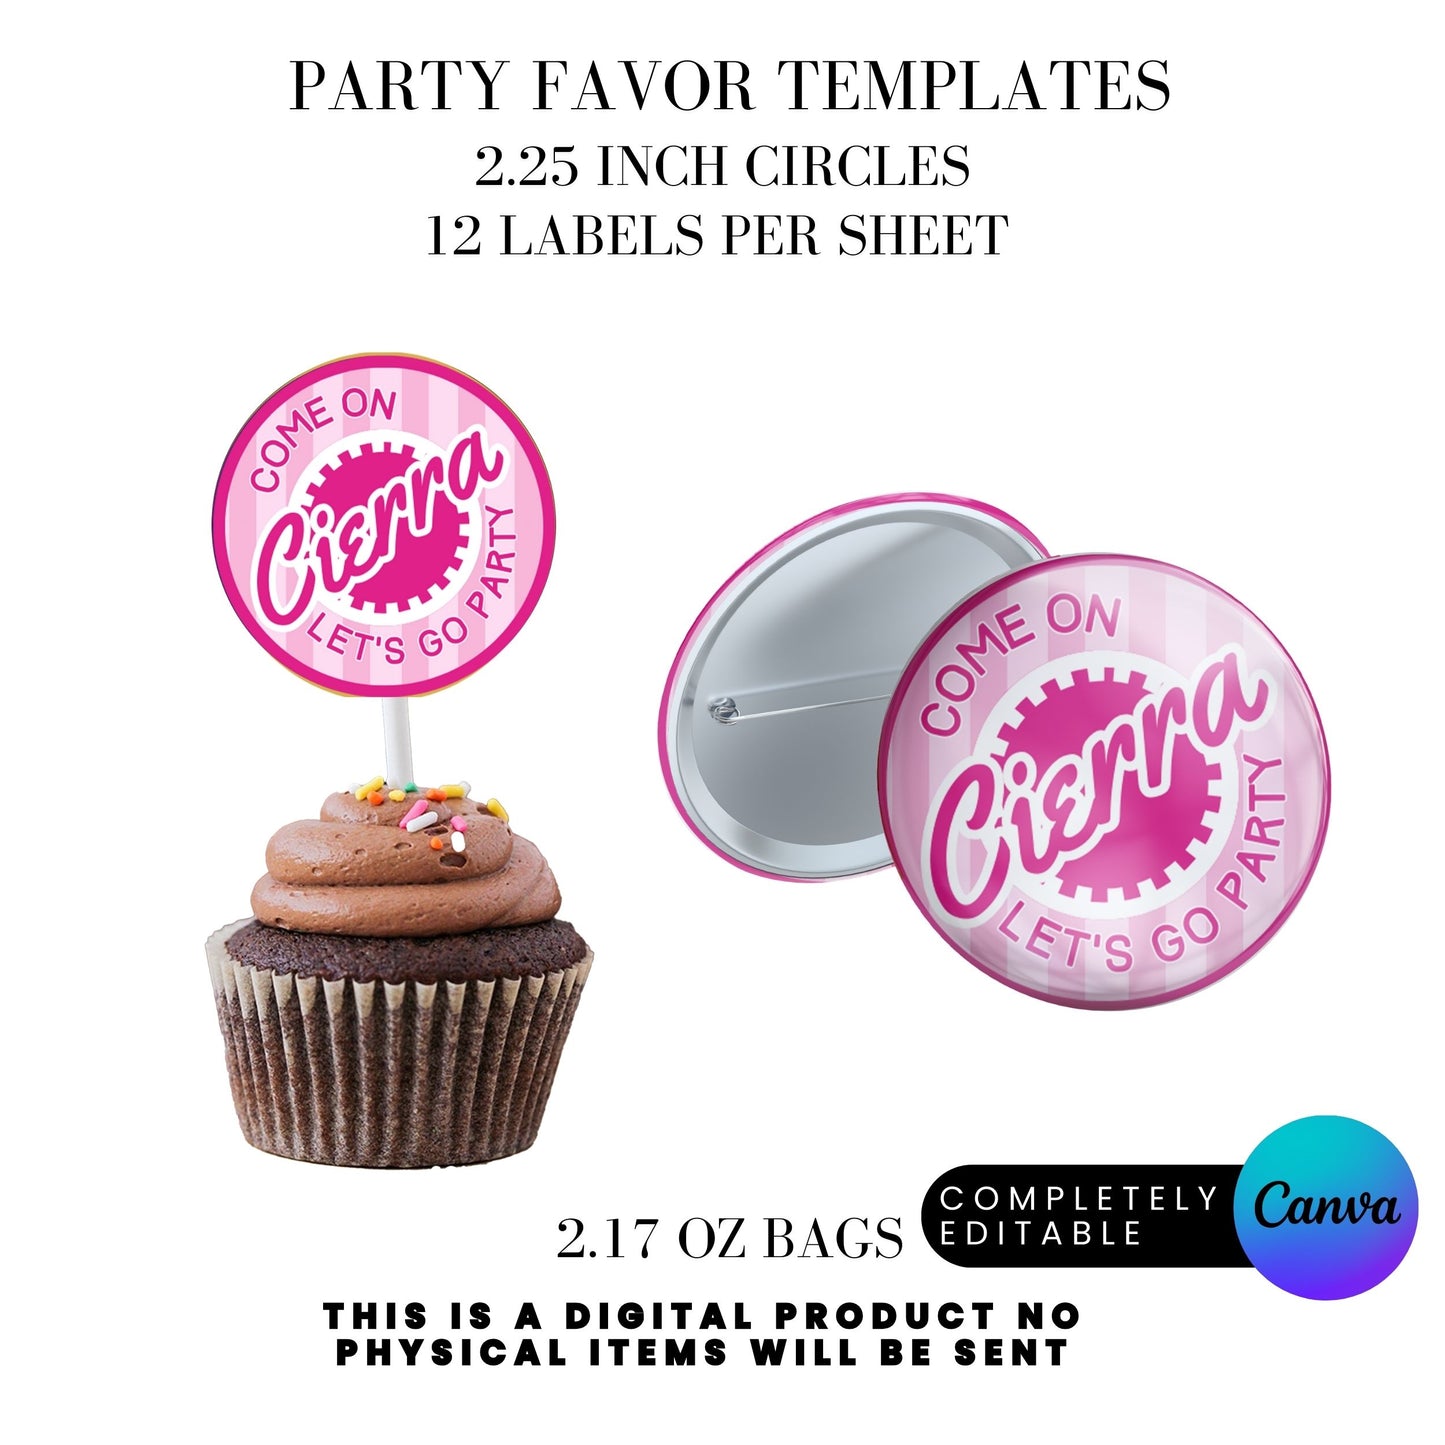 Come On Afro Barbie Birthday Party Favor Templates